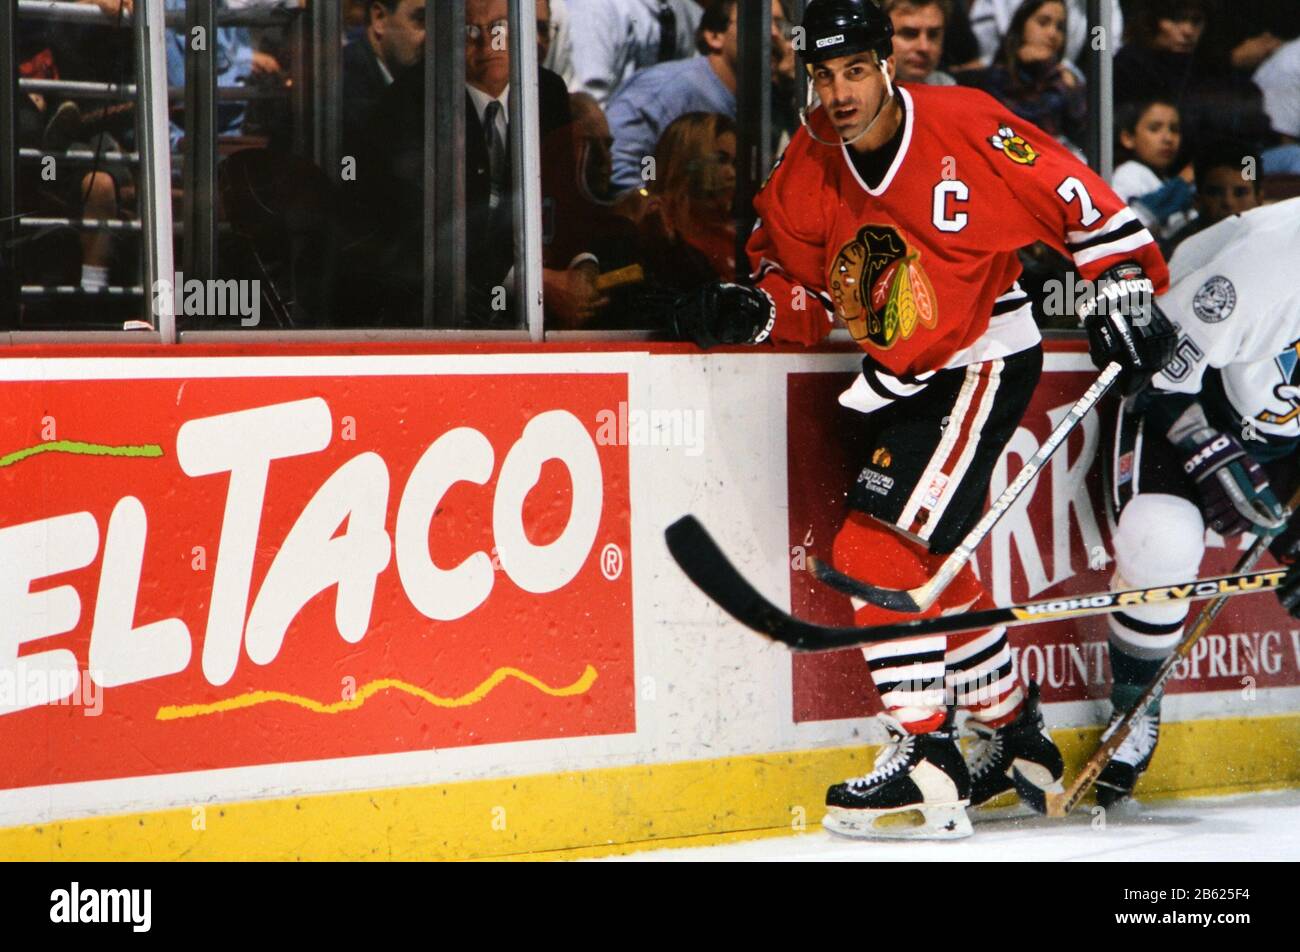 Sports Photo Gallery - At 45 Chris Chelios show no signs of